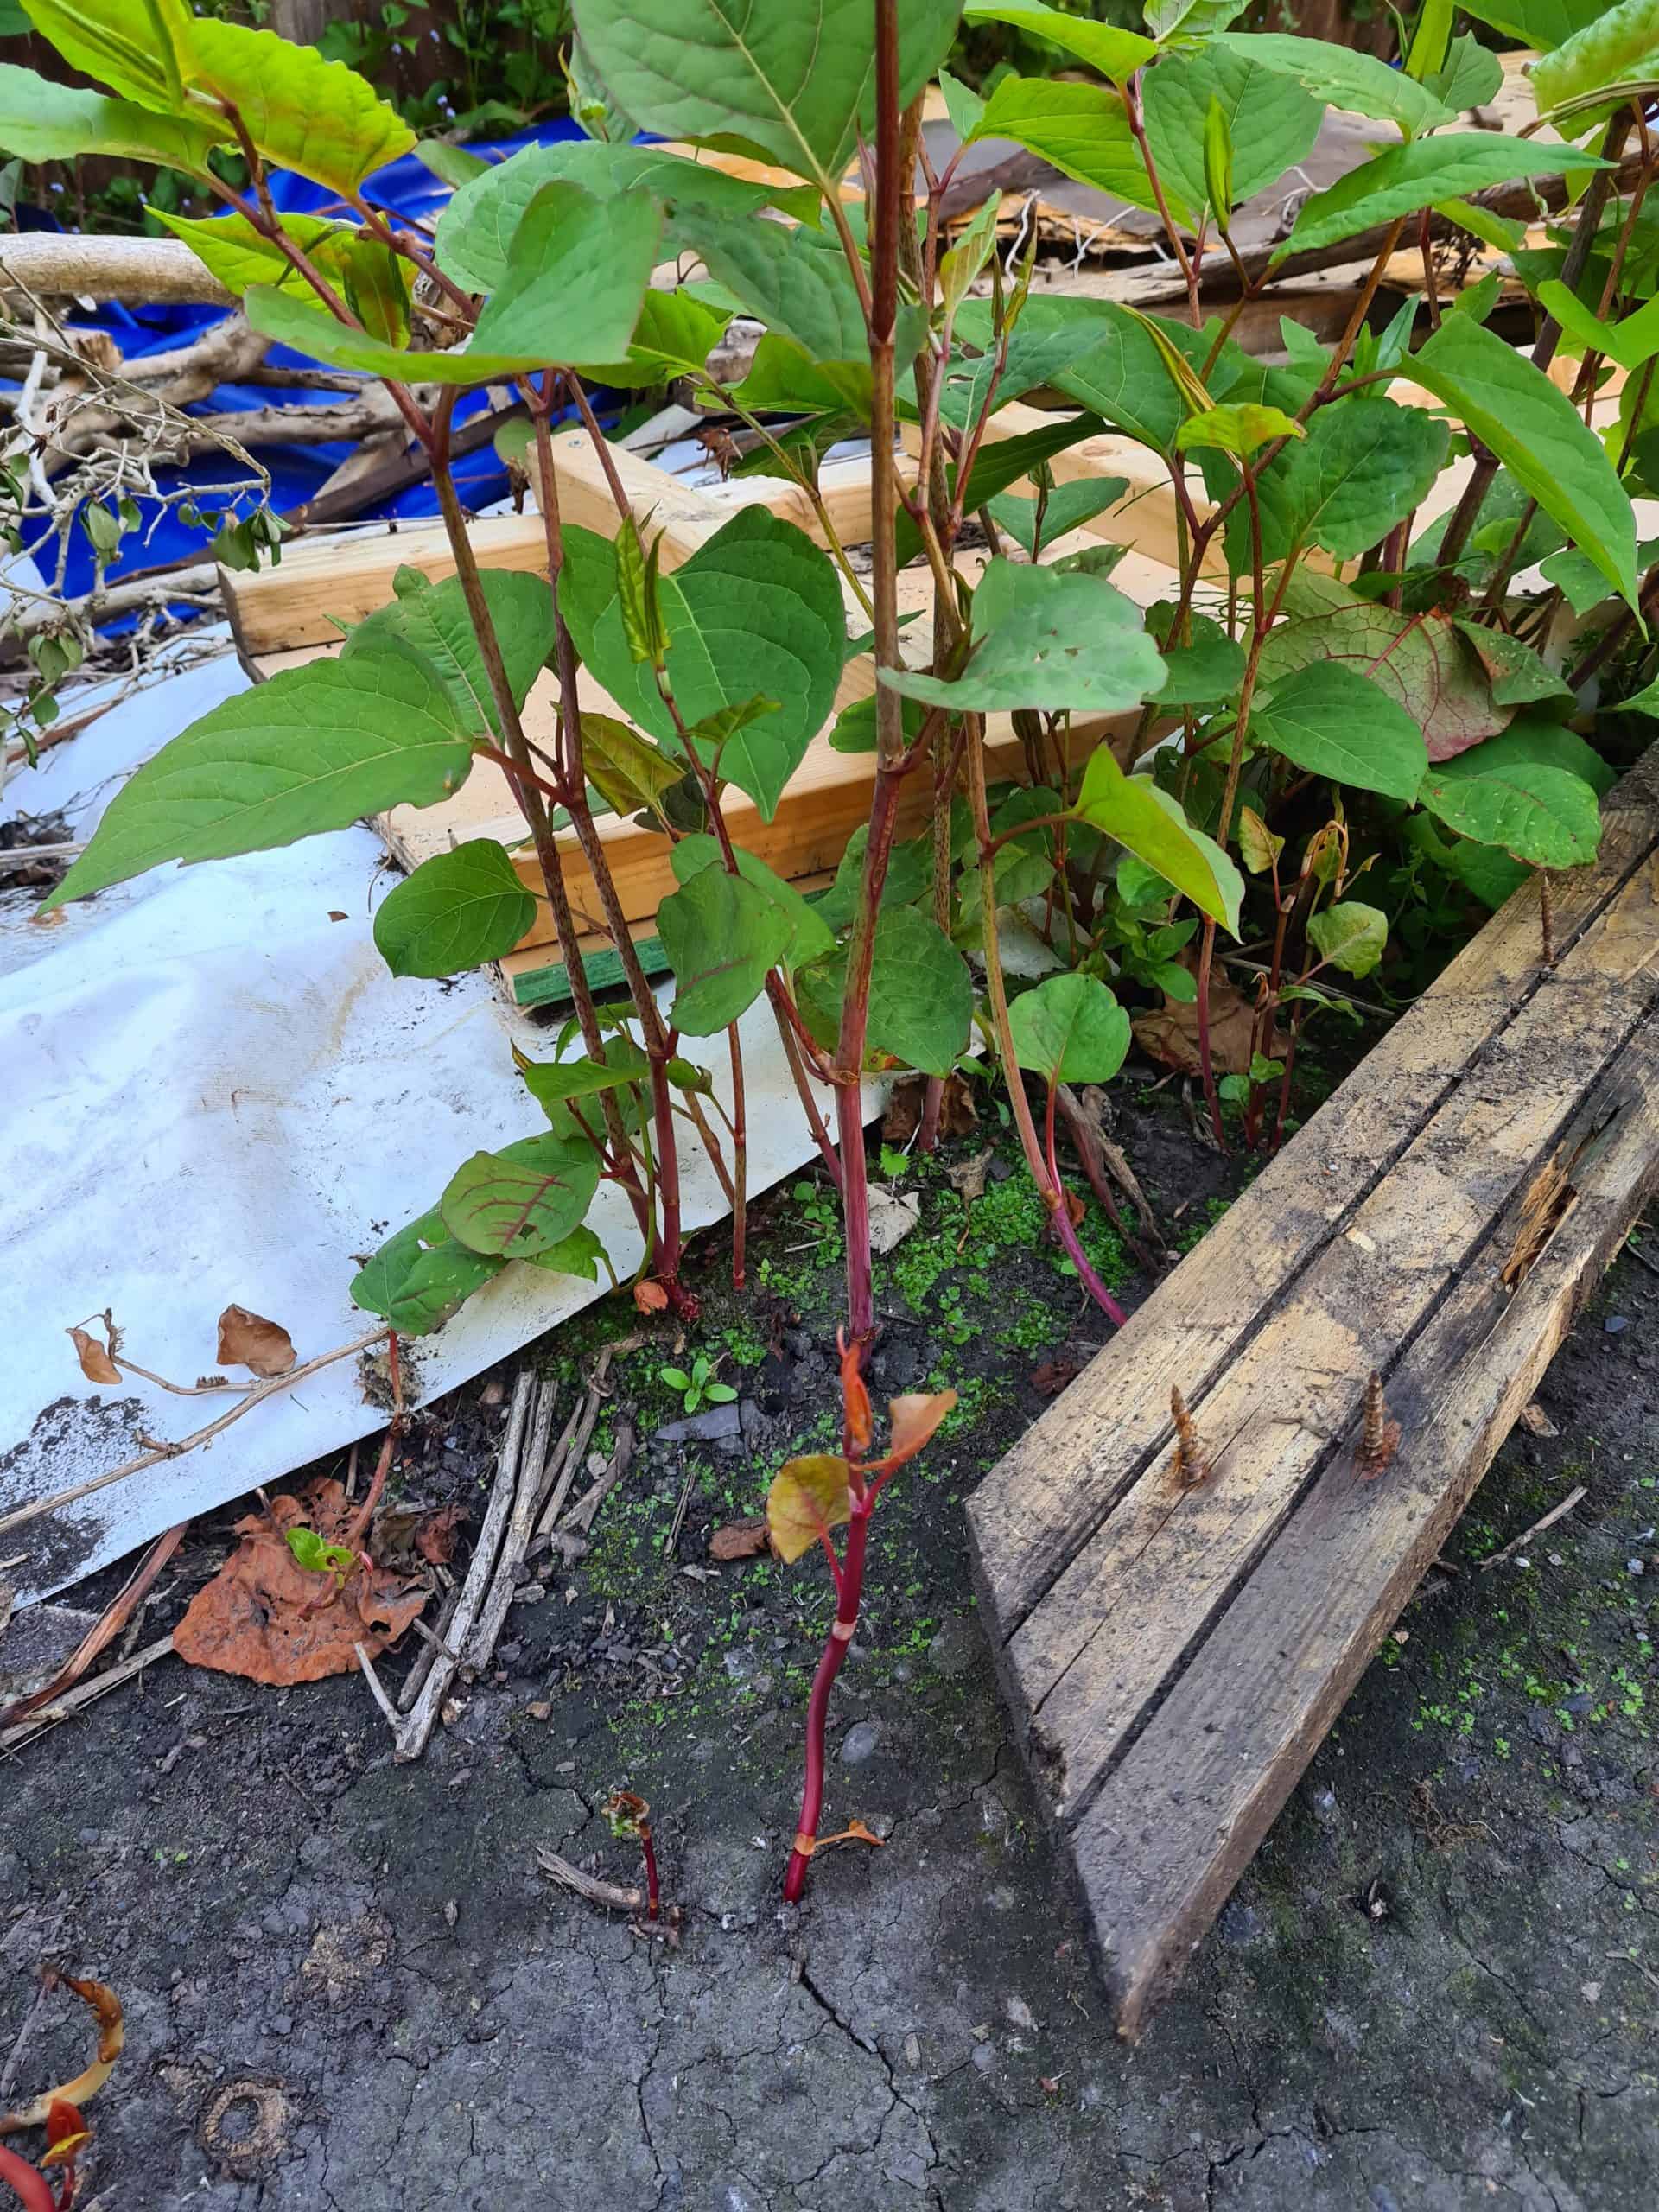 Best way to kill Japanese knotweed permanently so it does not spread through your property and causes damage